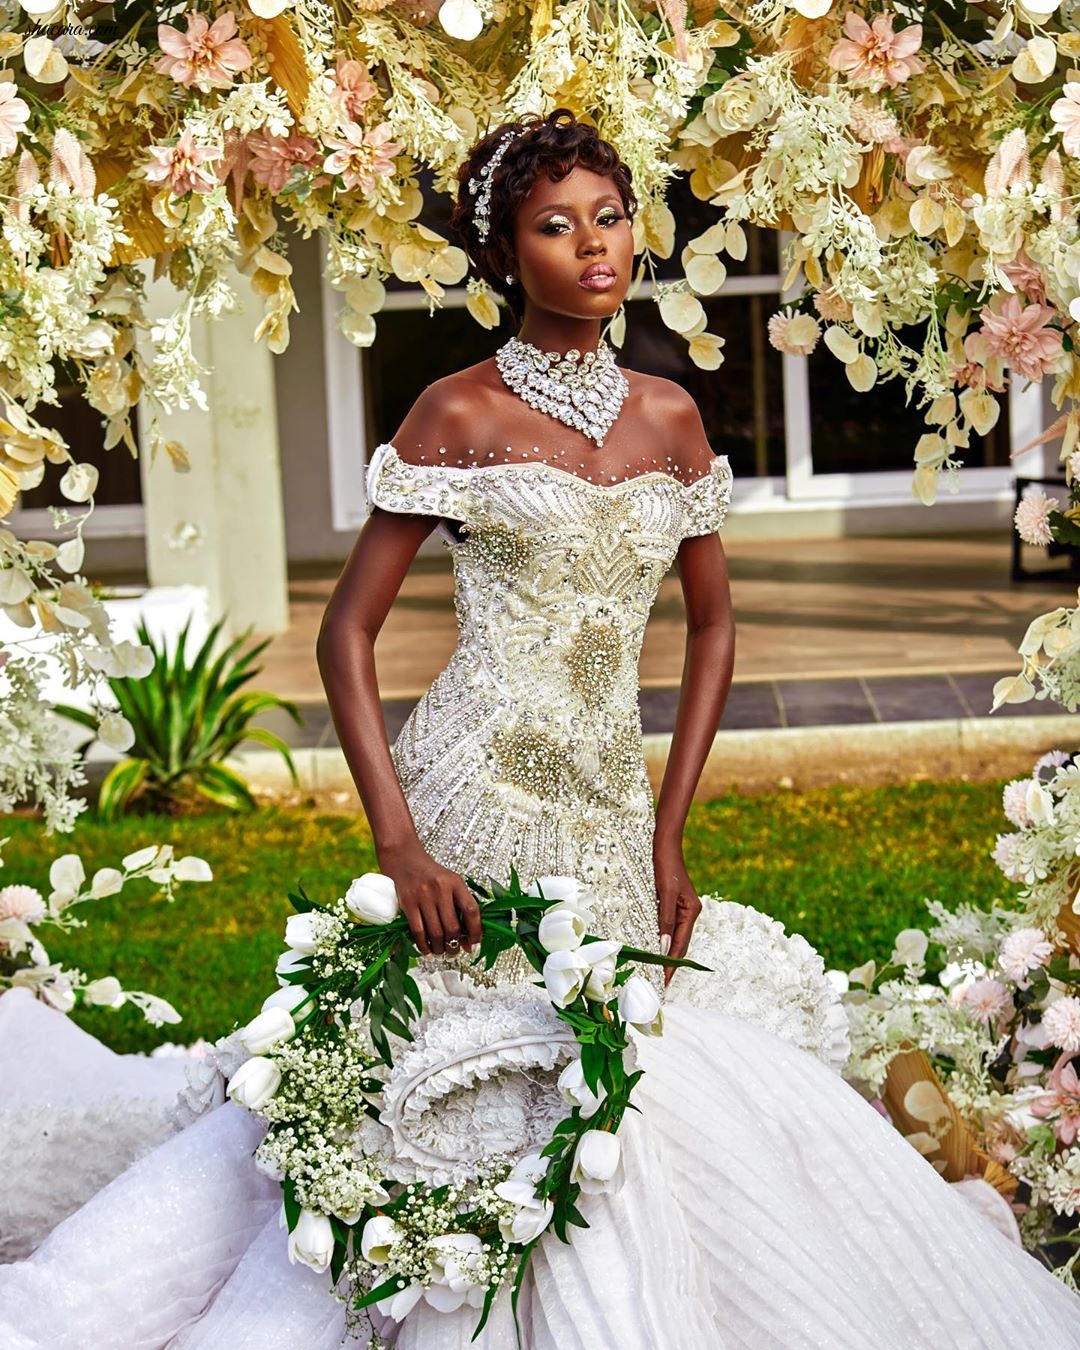 Ghanaian Designer, Sima Brew Releases A Dreamy Bridal Series, “The Utopian Collection”